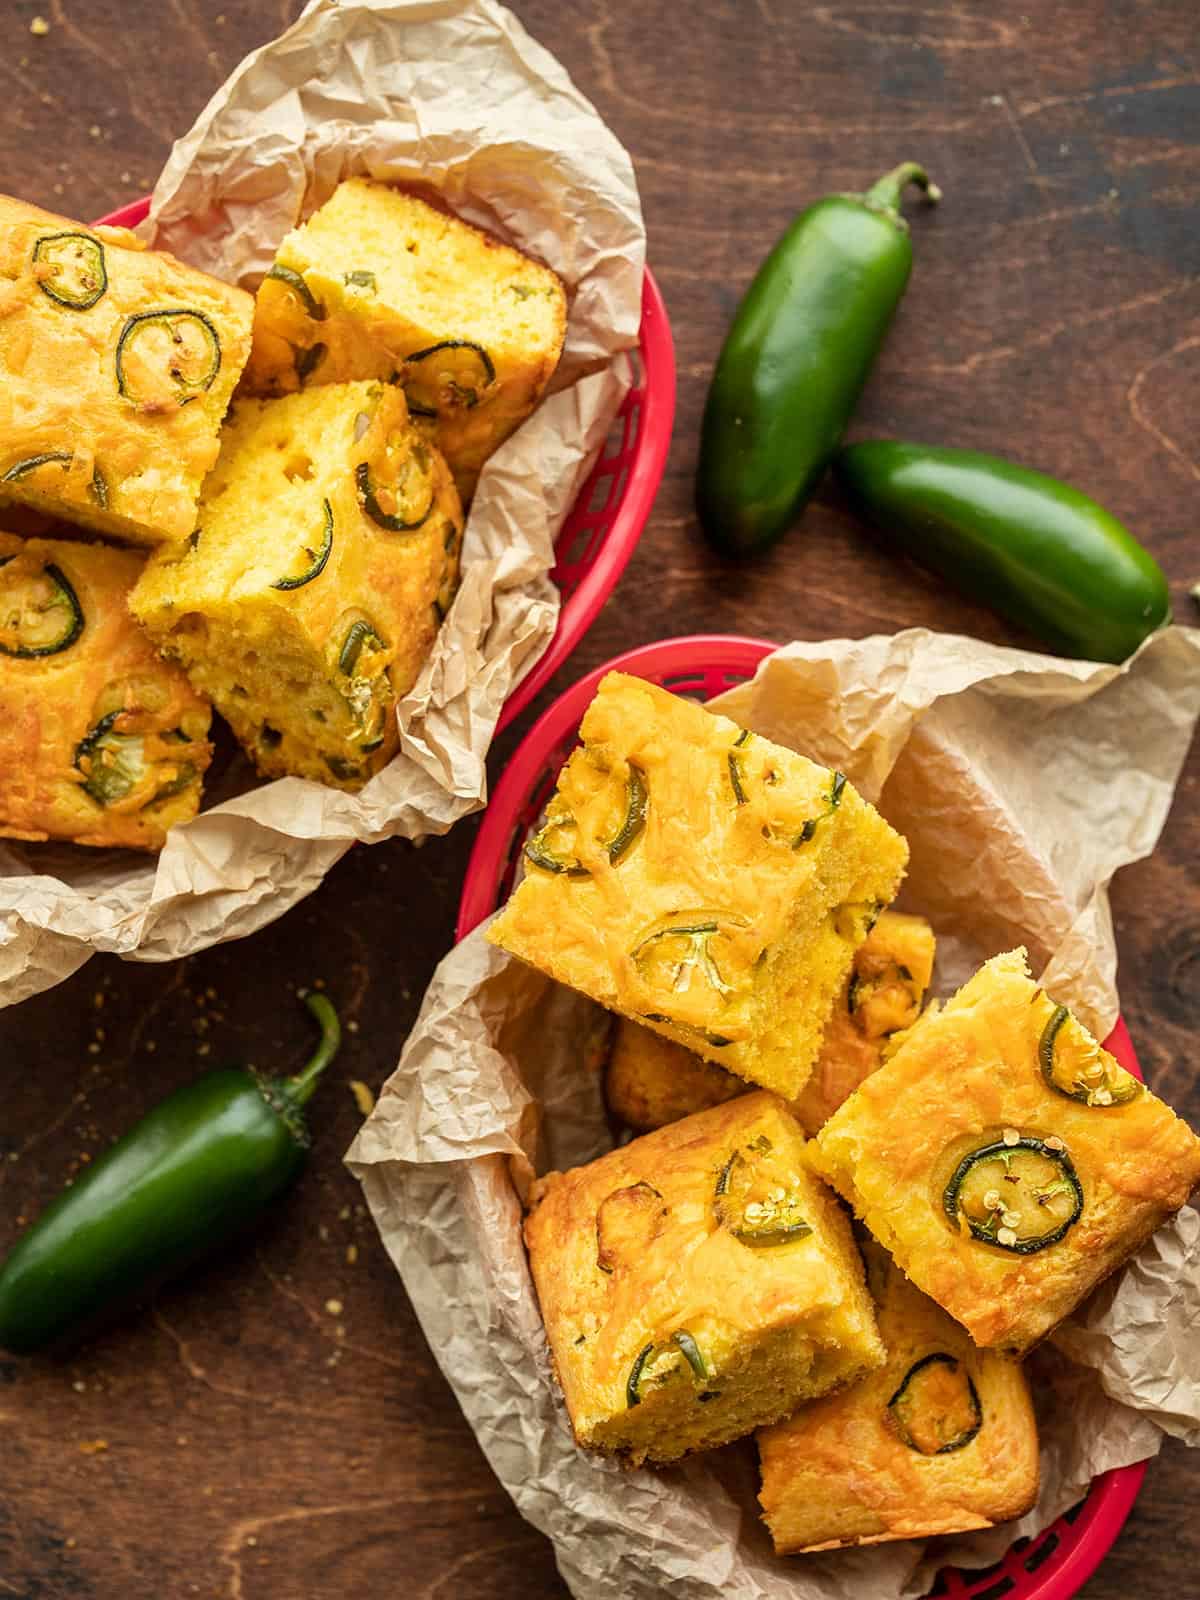 Two baskets of jalapeño cornbread pieces with whole jalapeños on the sides